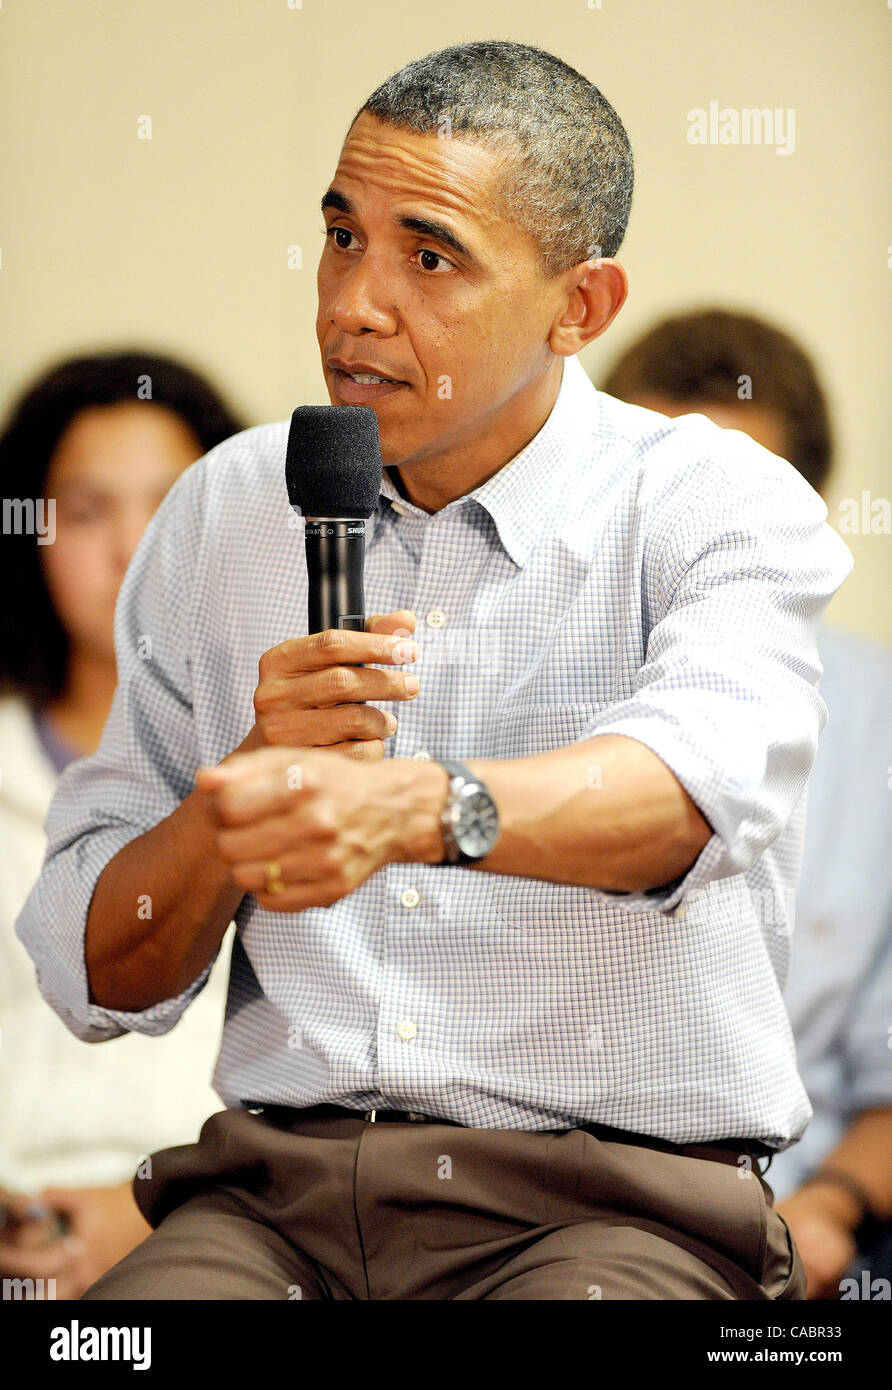 Sept 29, 2010 - Richmond, Virginia; USA - President BARACK OBAMA meets with members of the community at the Southhampton Recreation Association to discuss the economy in America.  Copyright 2010 Jason Moore. (Credit Image: © Jason Moore/ZUMApress.com) Stock Photo